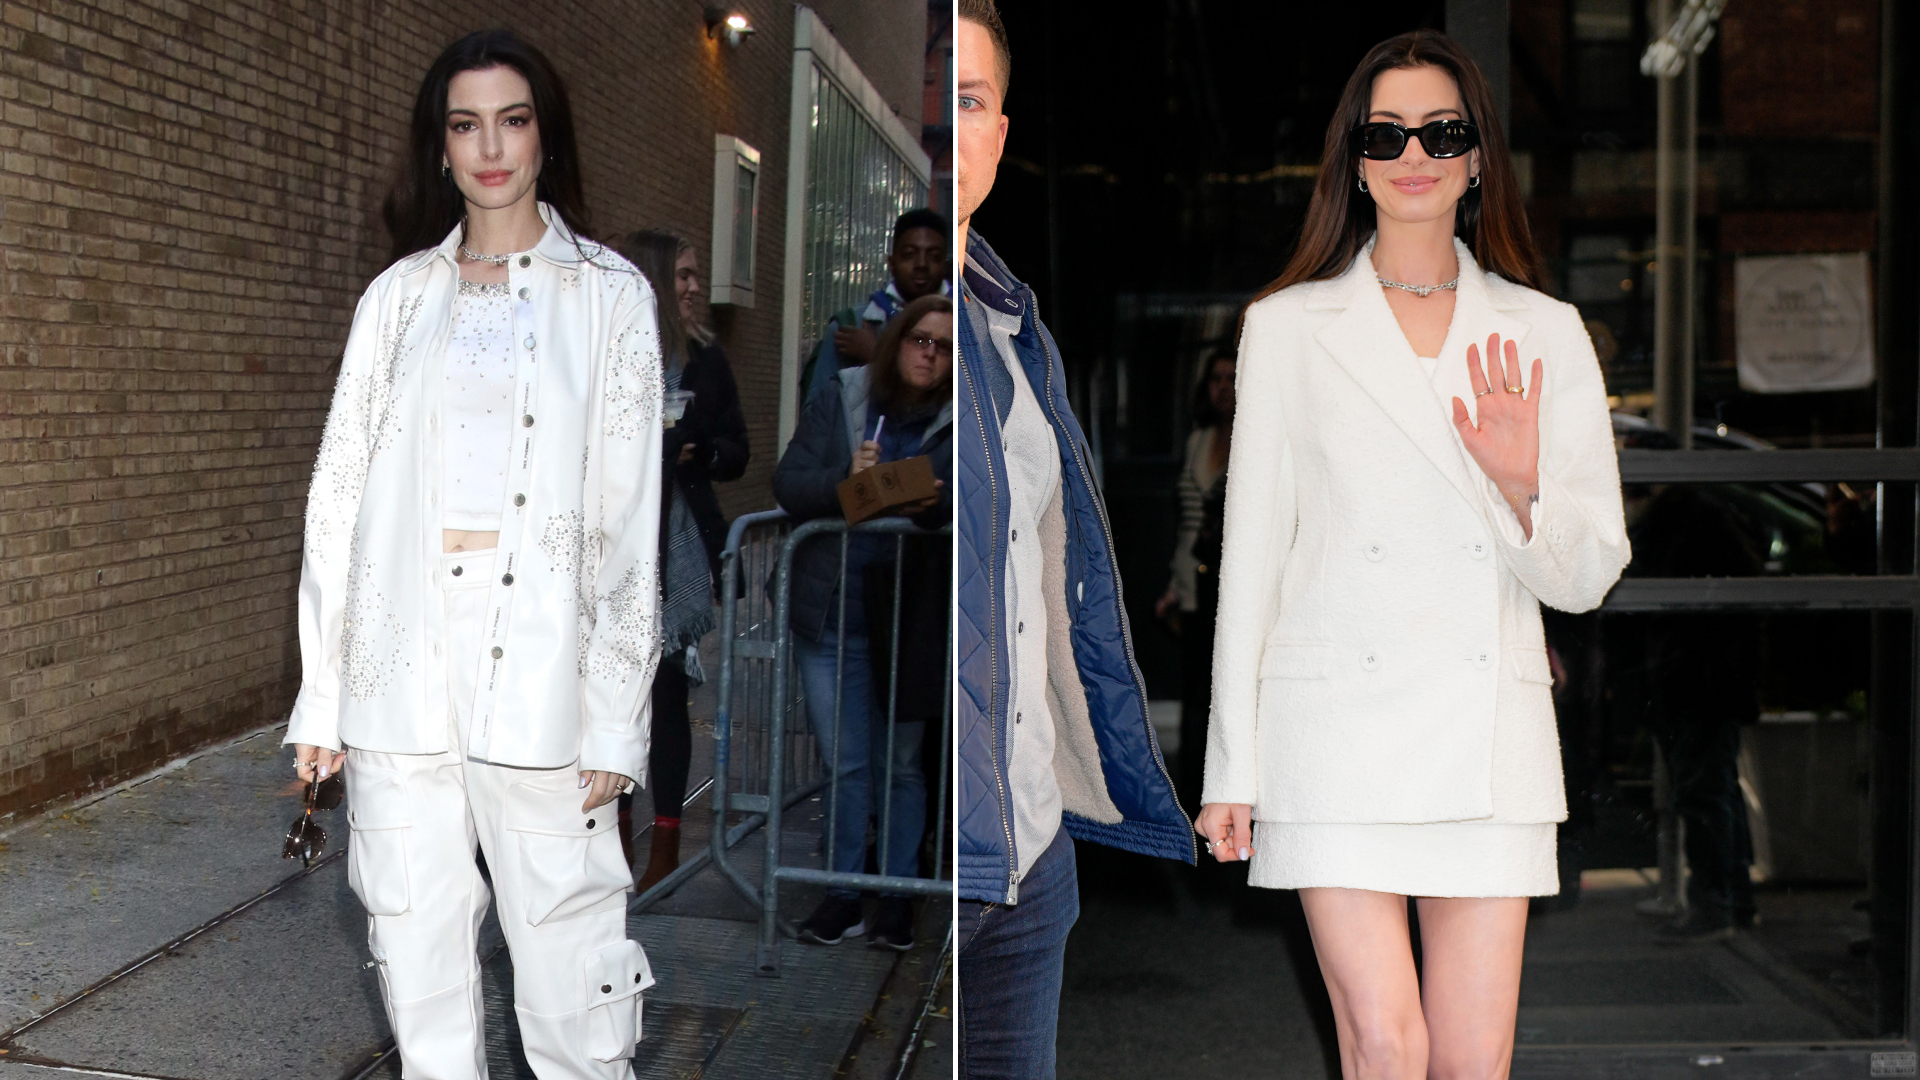 Anne Hathaway's $249 White Wide-Leg Jeans Look Just Like This $42 Pair